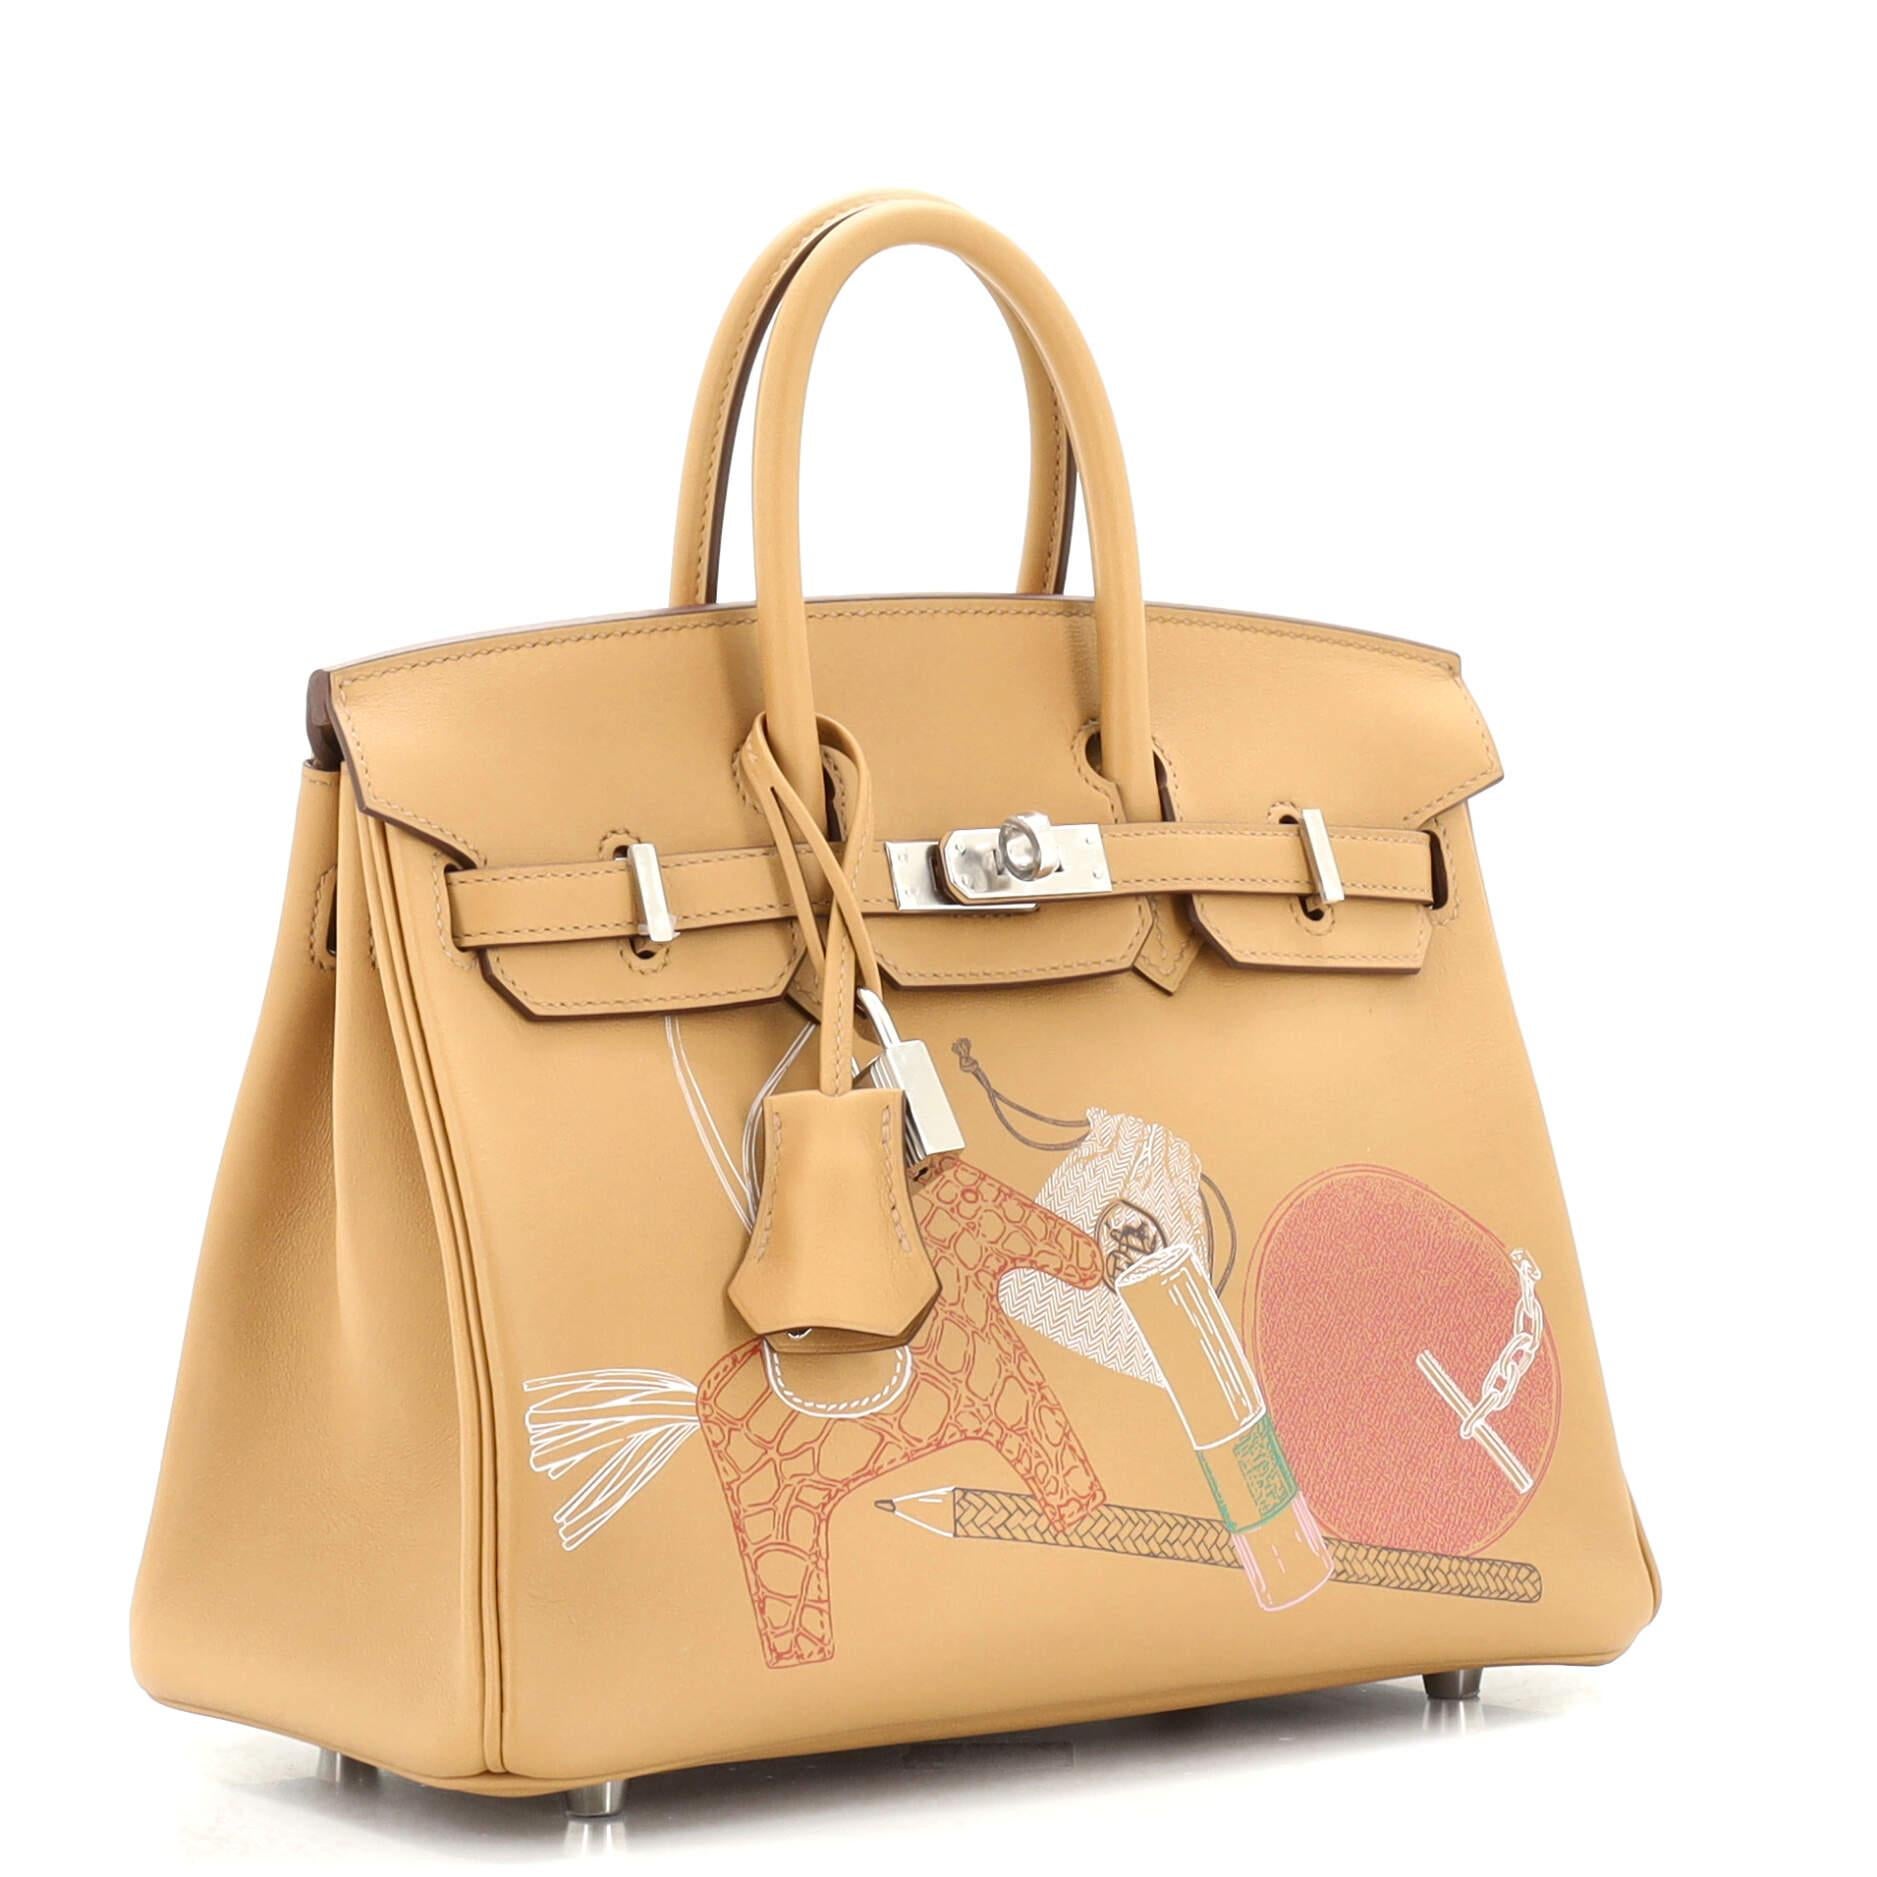 Orange Hermes In and Out Birkin Bag Limited Edition Swift with Palladium Hardware 25